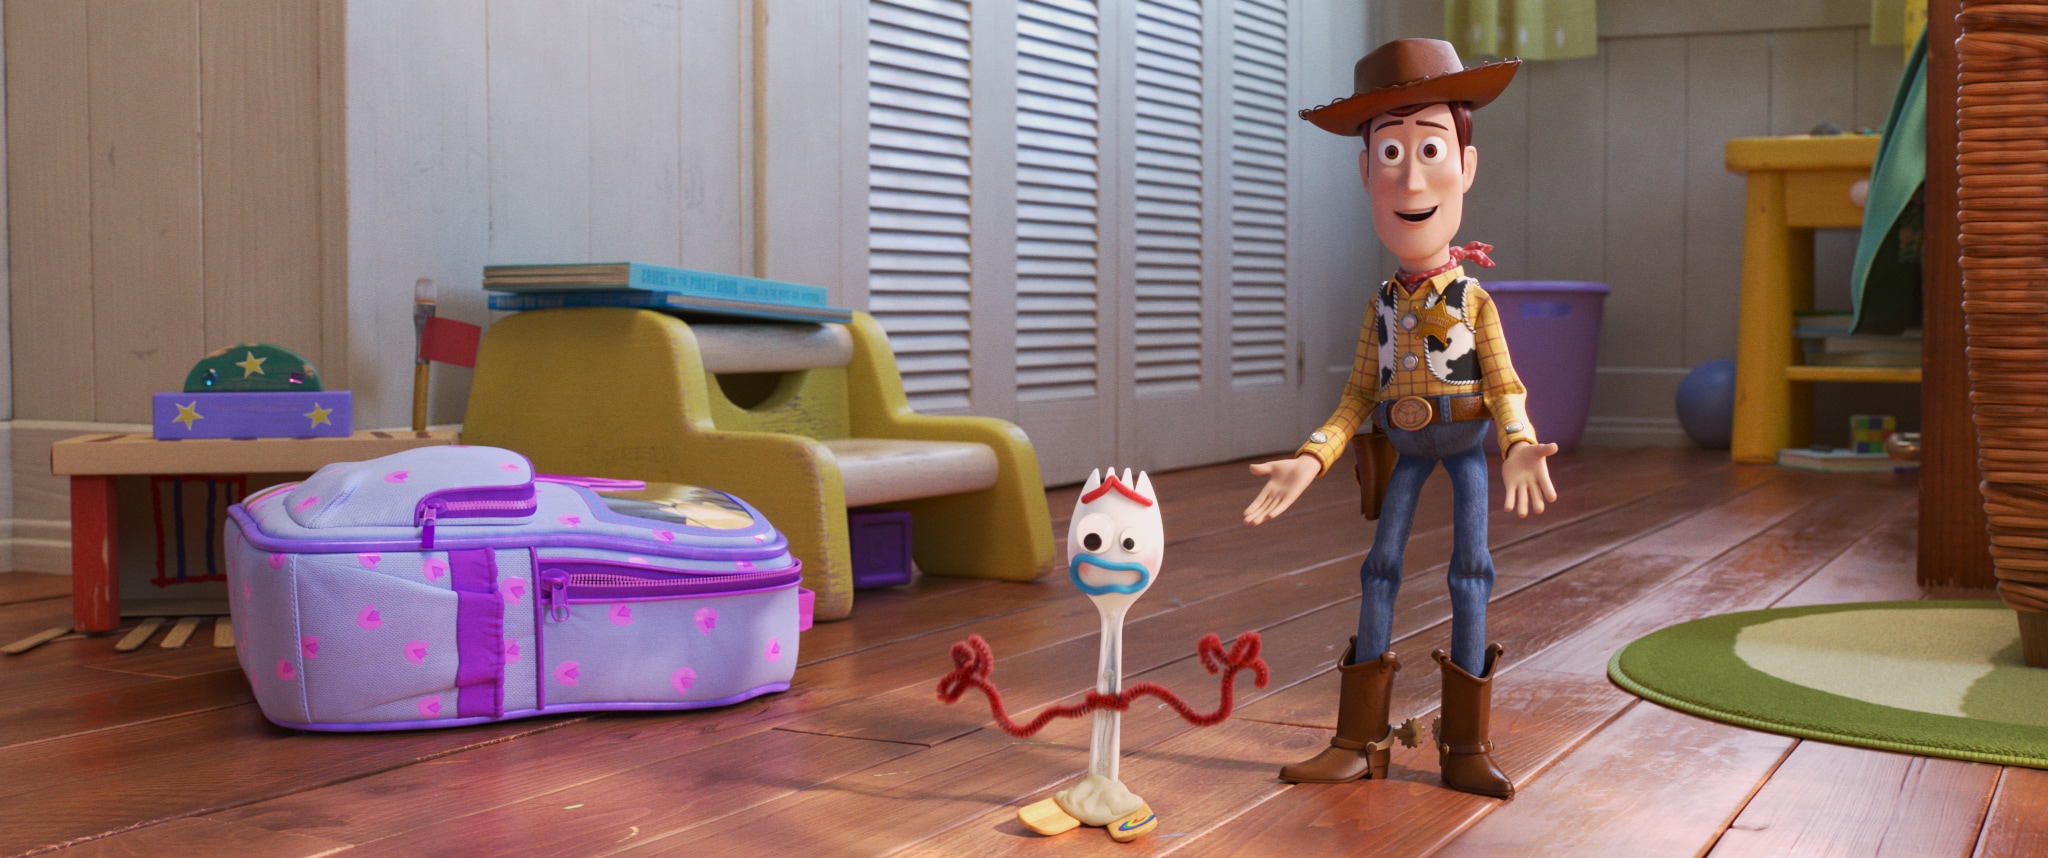 Toy Story 4 Final Trailer